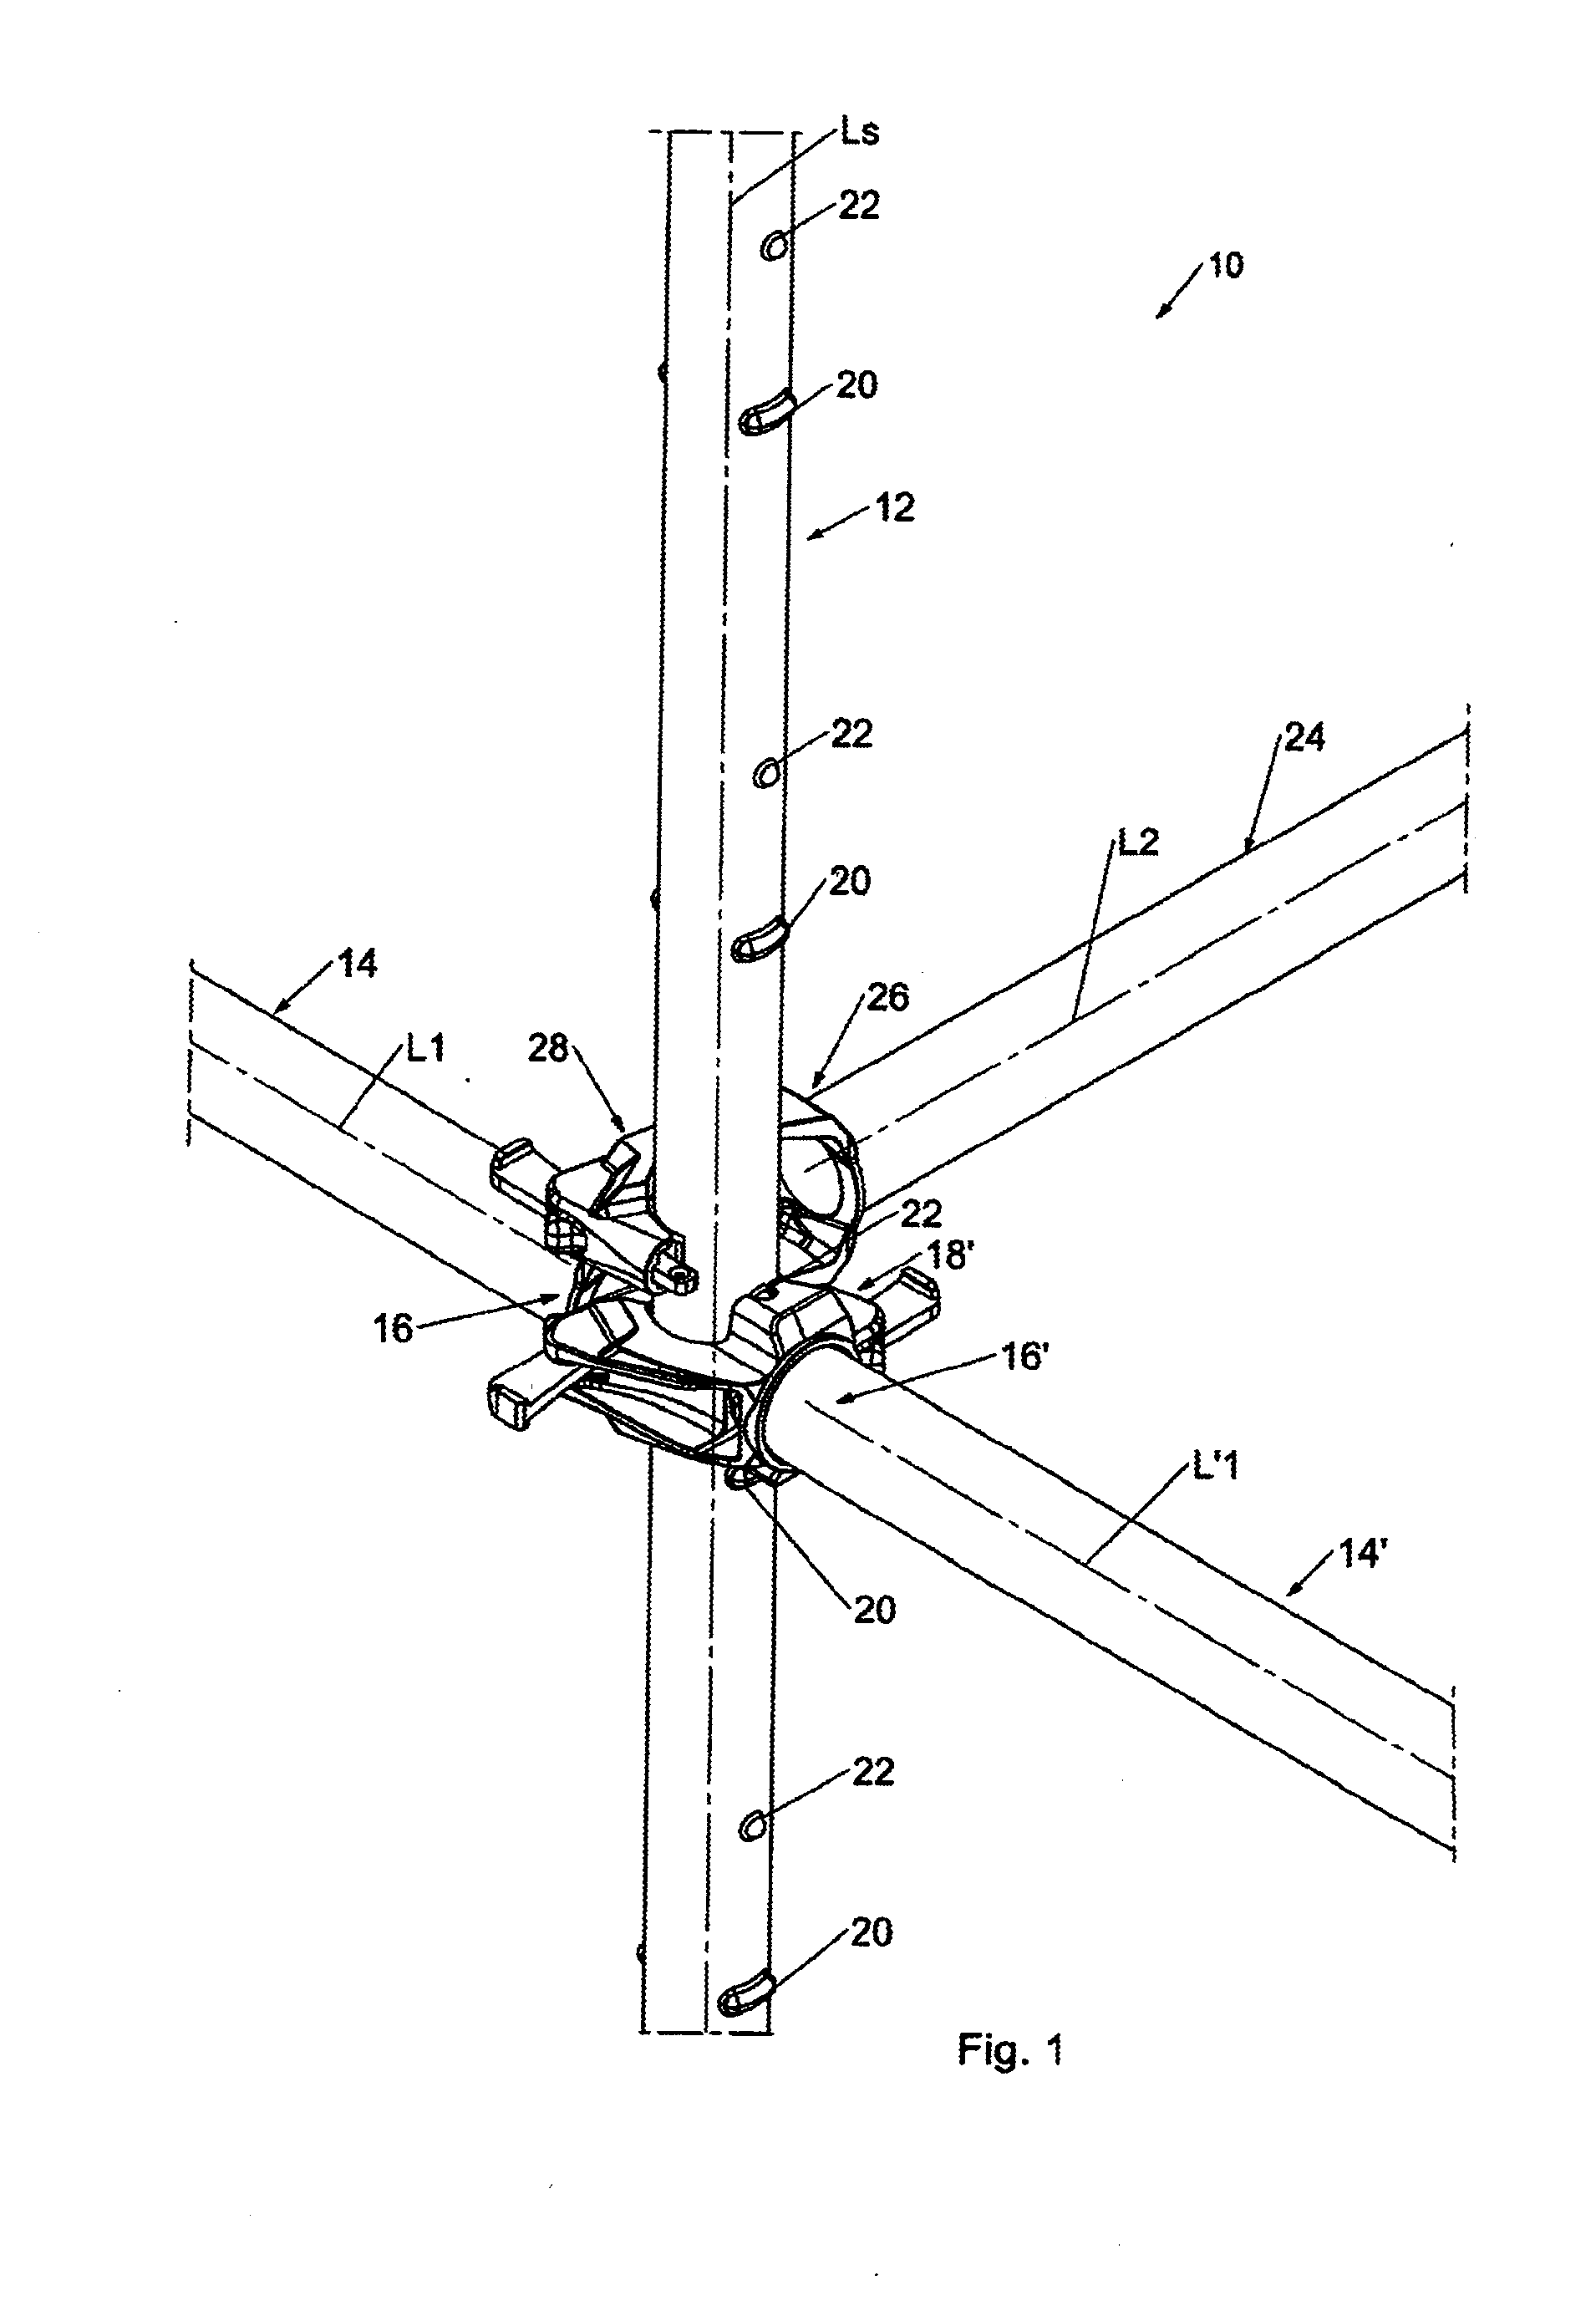 Scaffolding System, as Well as a Coupling, a Ledger and a Standard